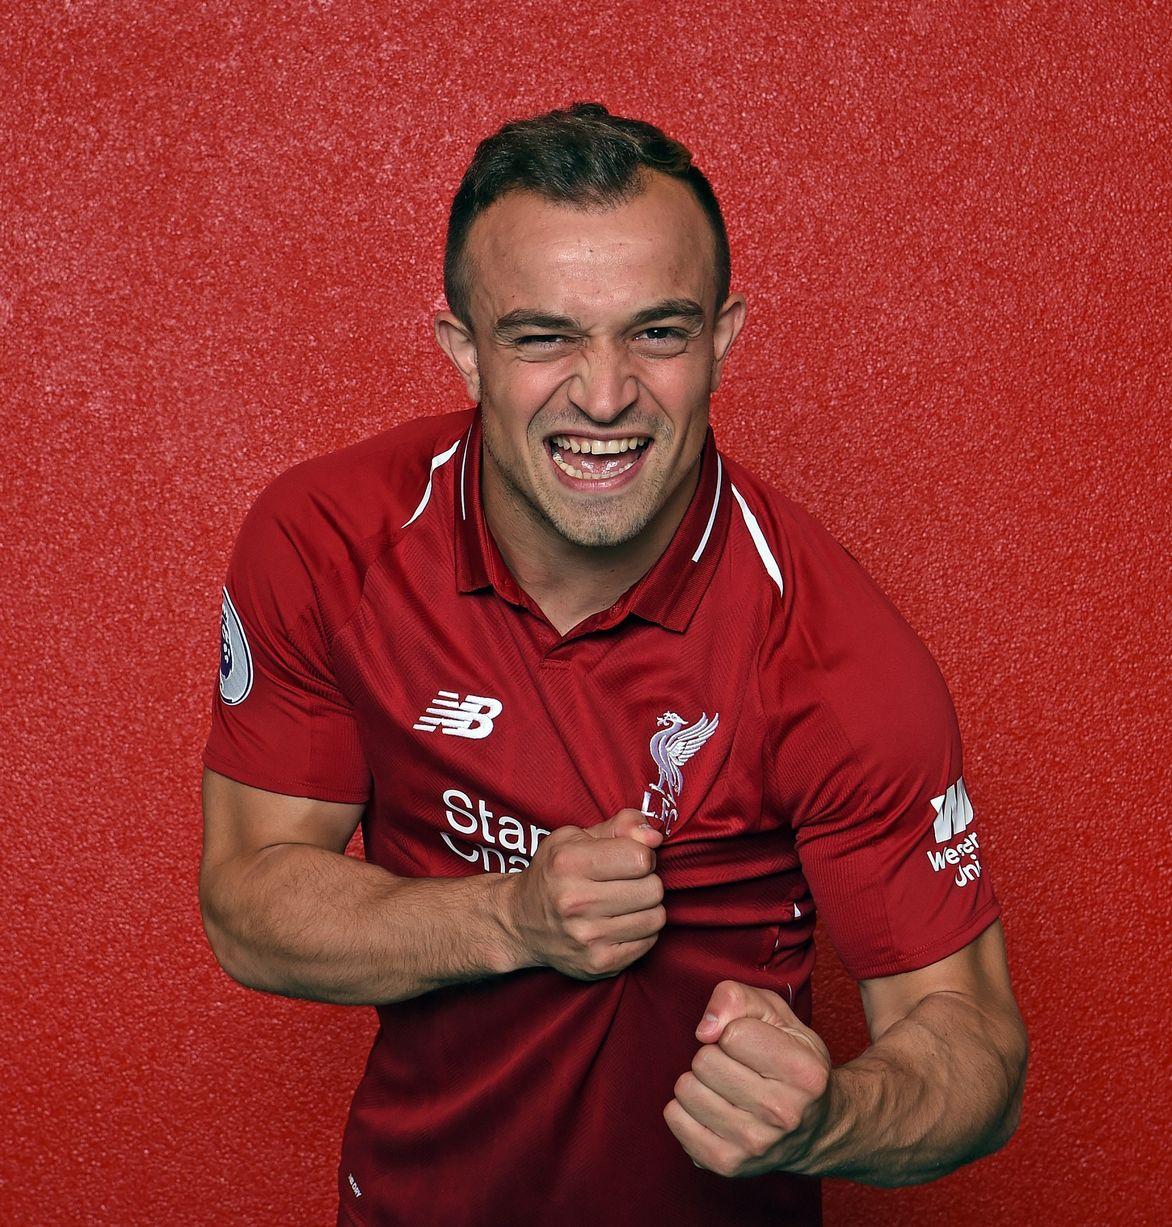 The very best picture of Xherdan Shaqiri's first day